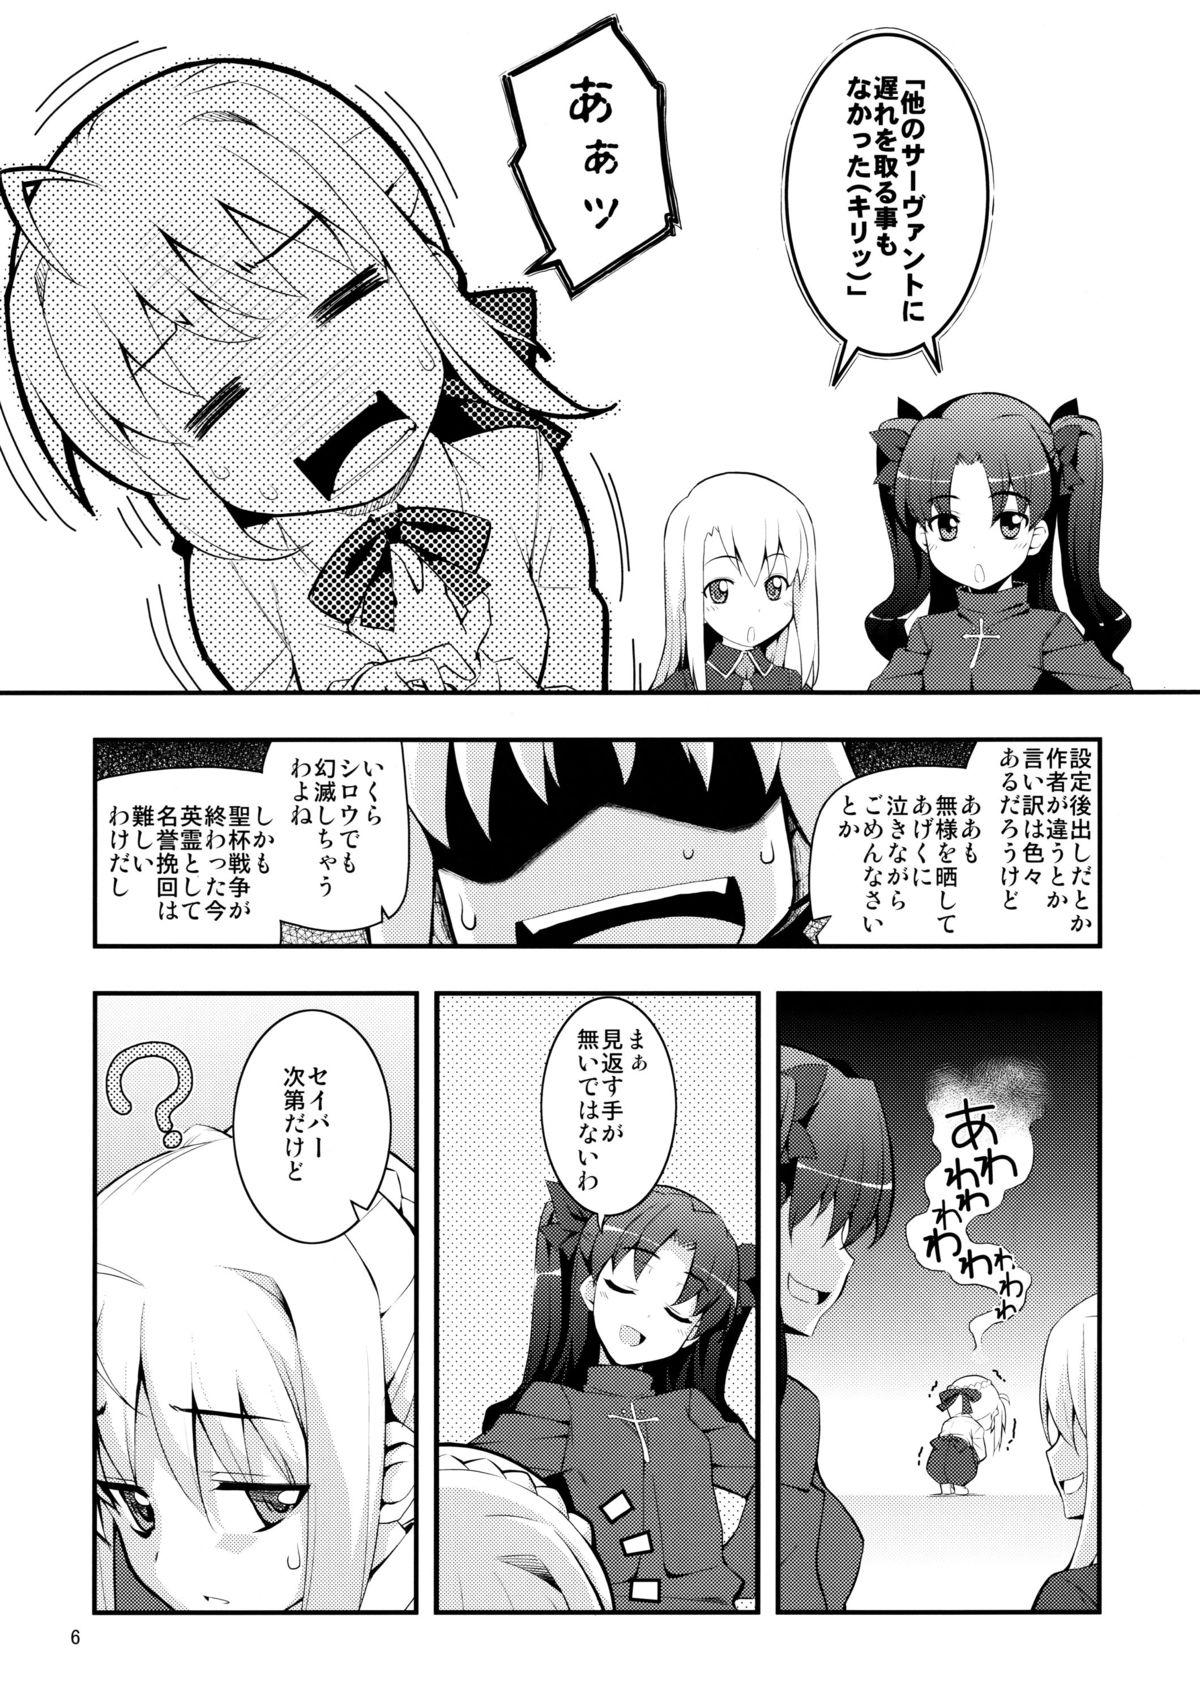 Uncut RE 17 - Fate stay night Hidden Cam - Page 5